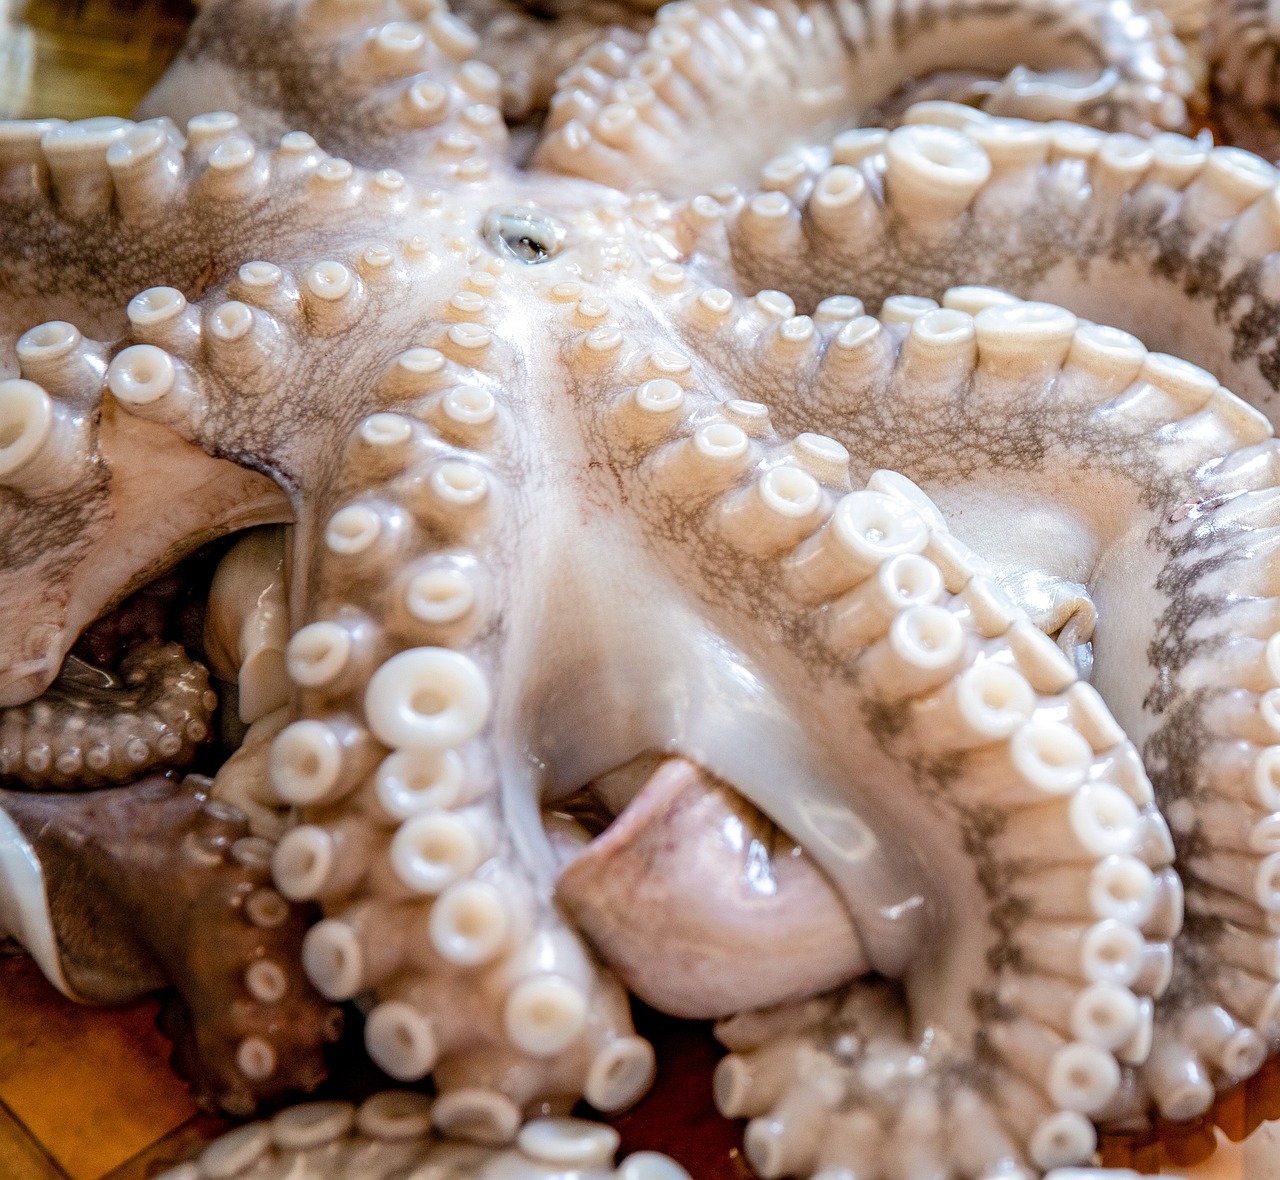 Octopus/Cuttlefish at the market